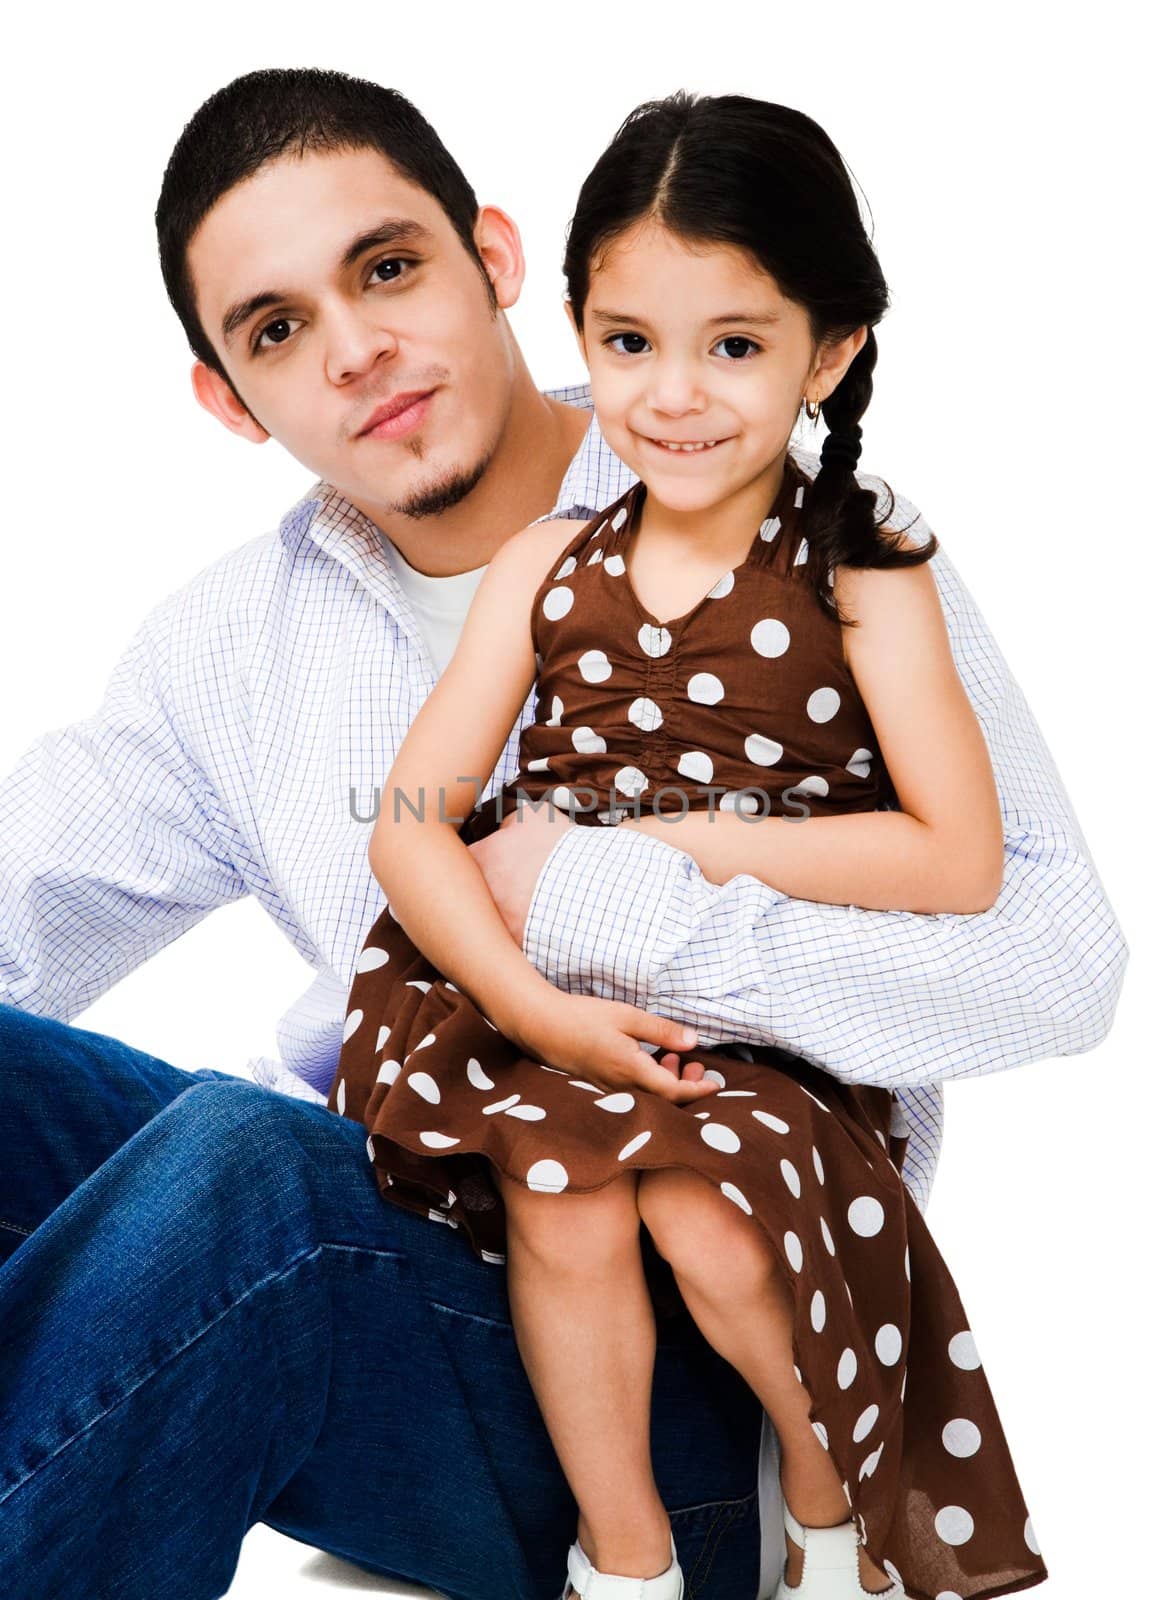 Portrait of a man hugging a girl isolated over white